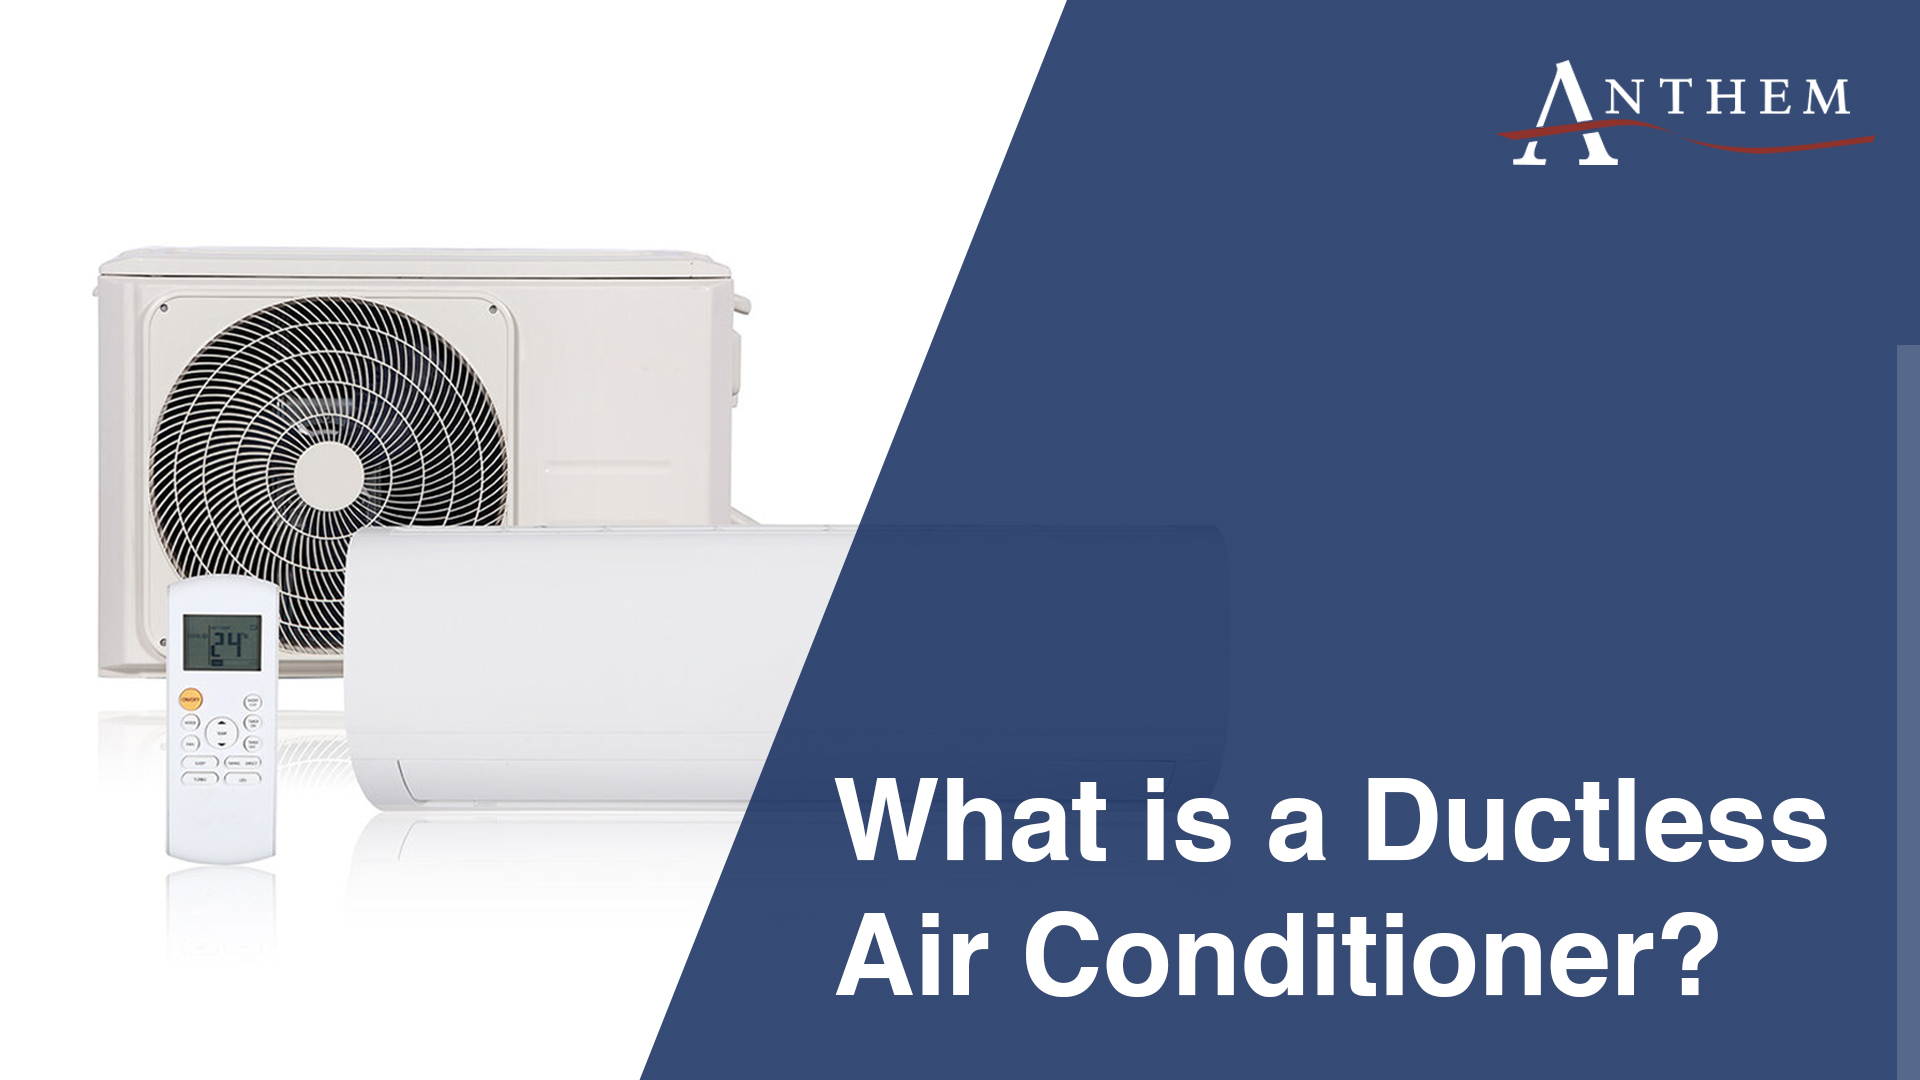 What Is a Ductless Air Conditioner?